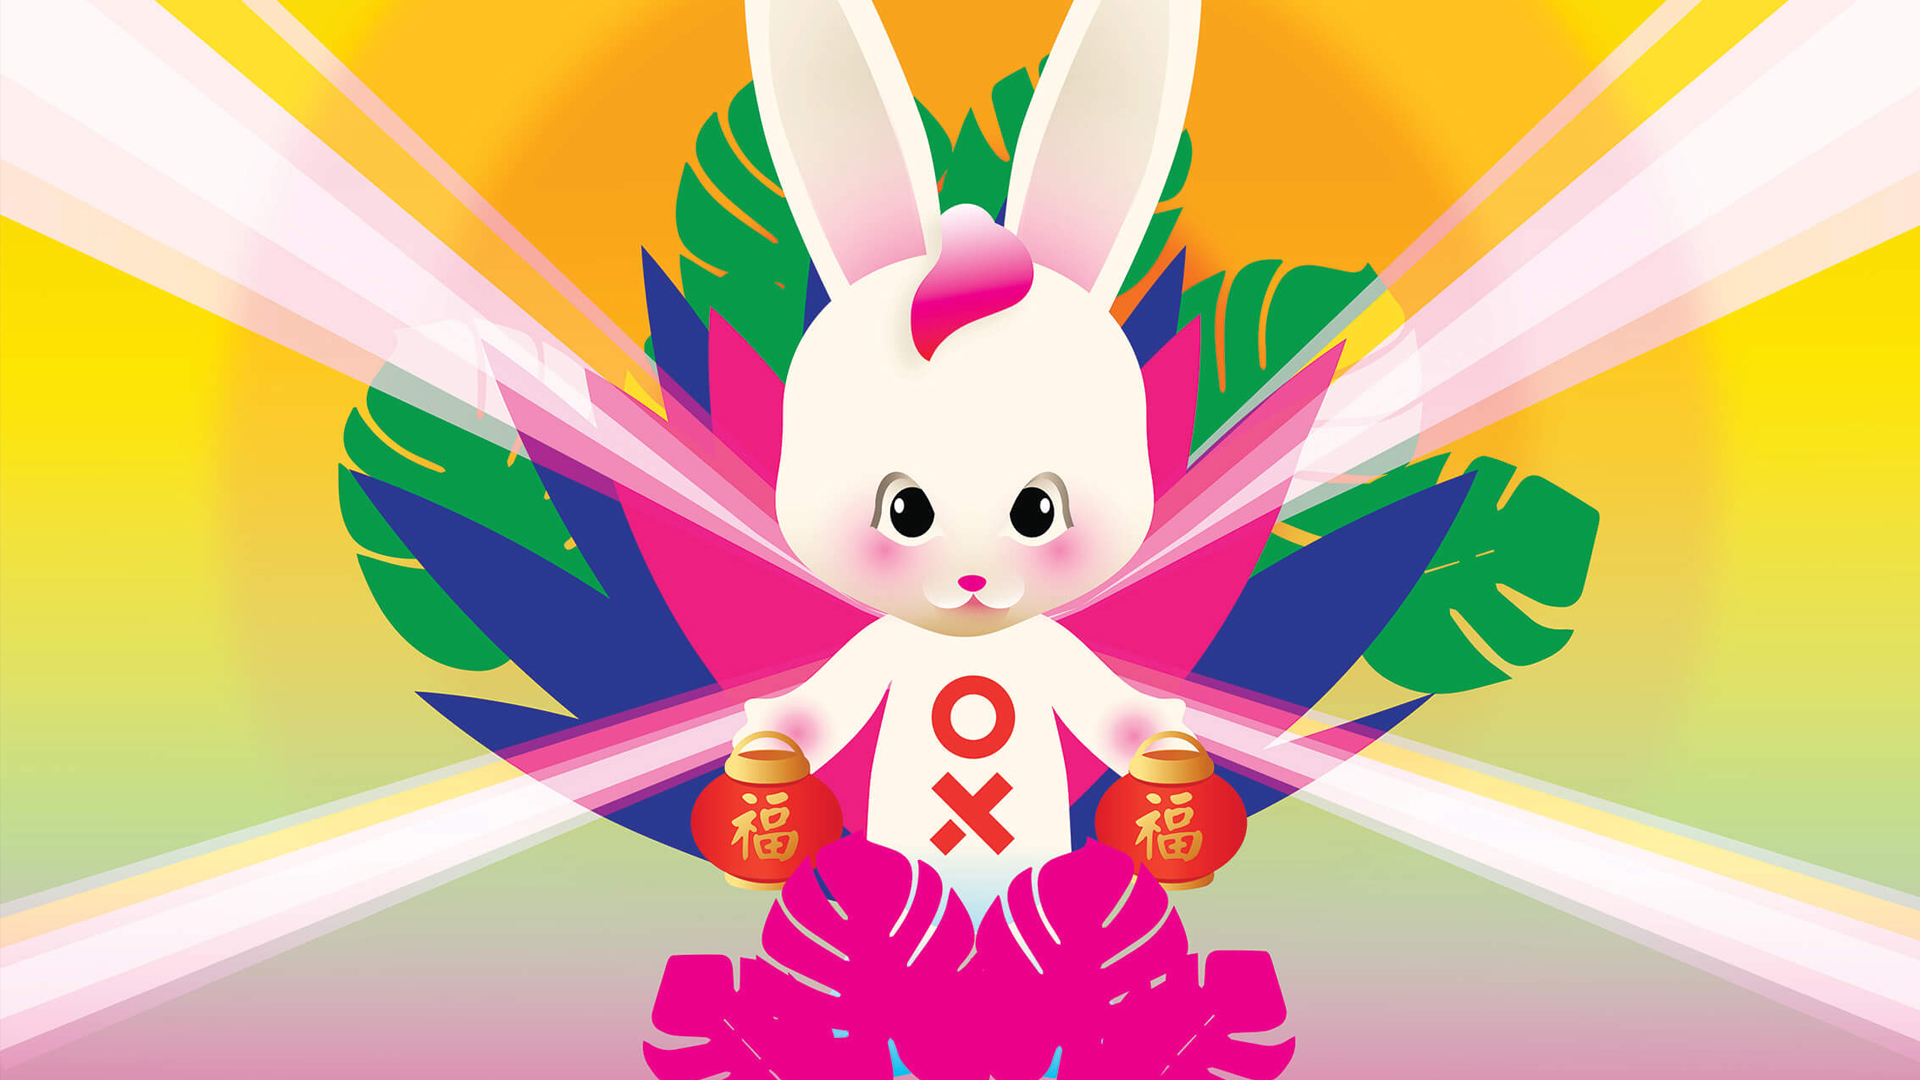 Digital art showing a rabbit celebrating Lunar New Year to promote the Lucky Lunar experiential brand activation for World Square Sydney